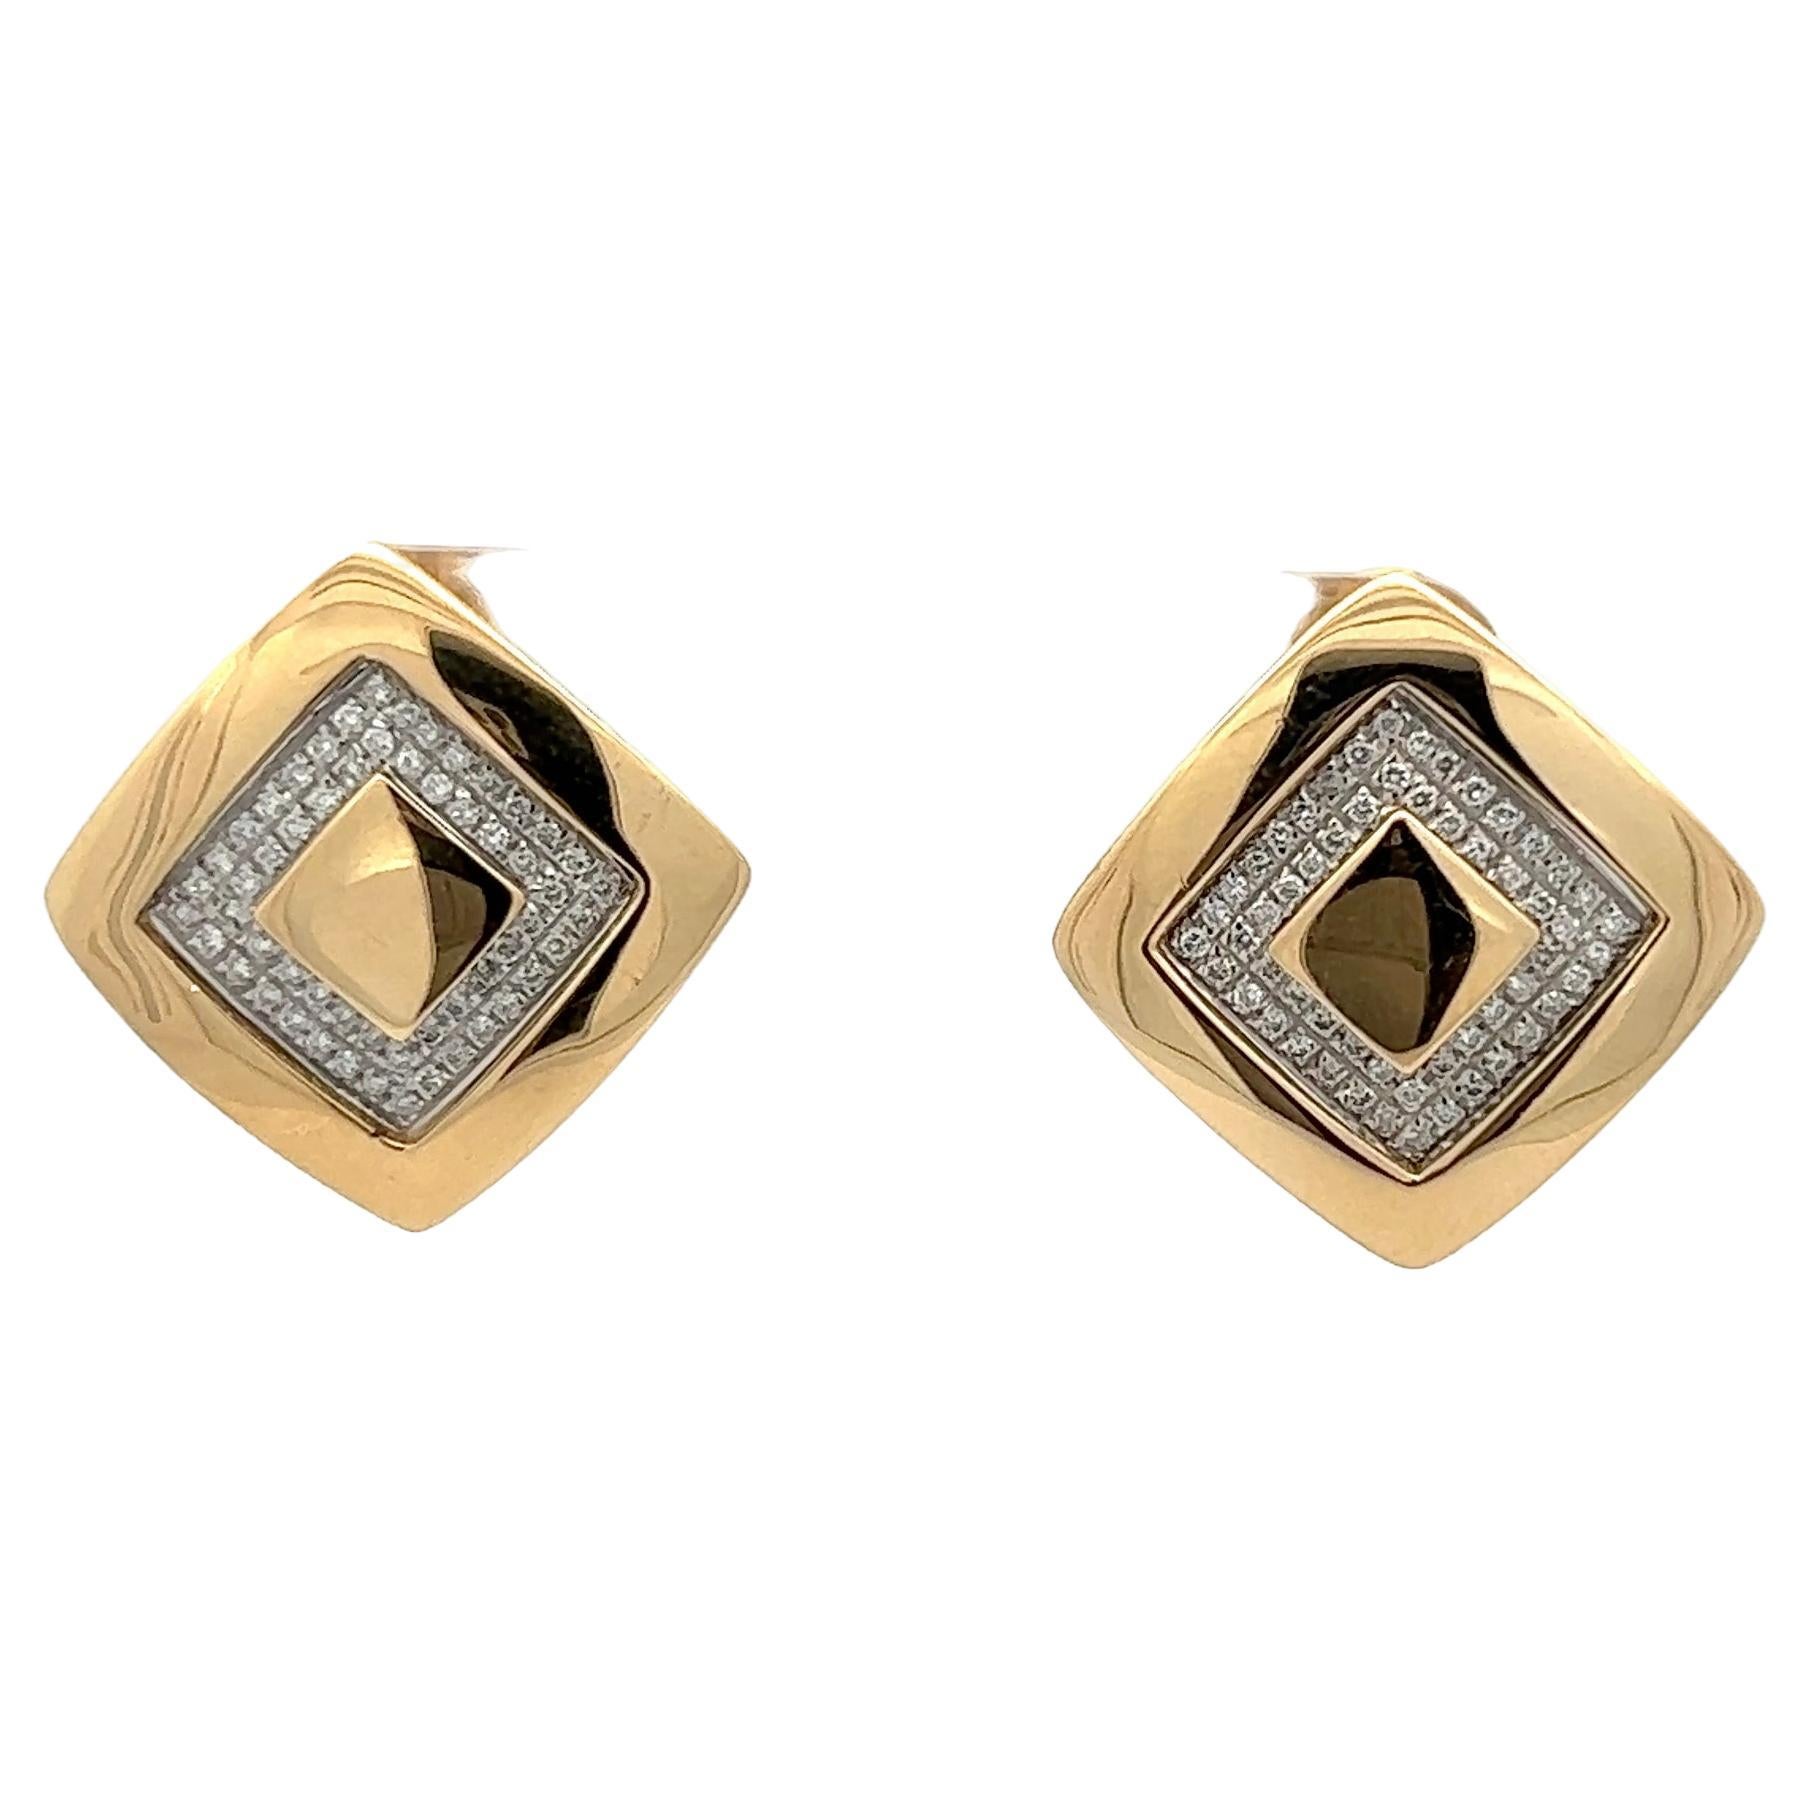 A pair of 18k yellow gold and diamond earrings by Versace. For Sale